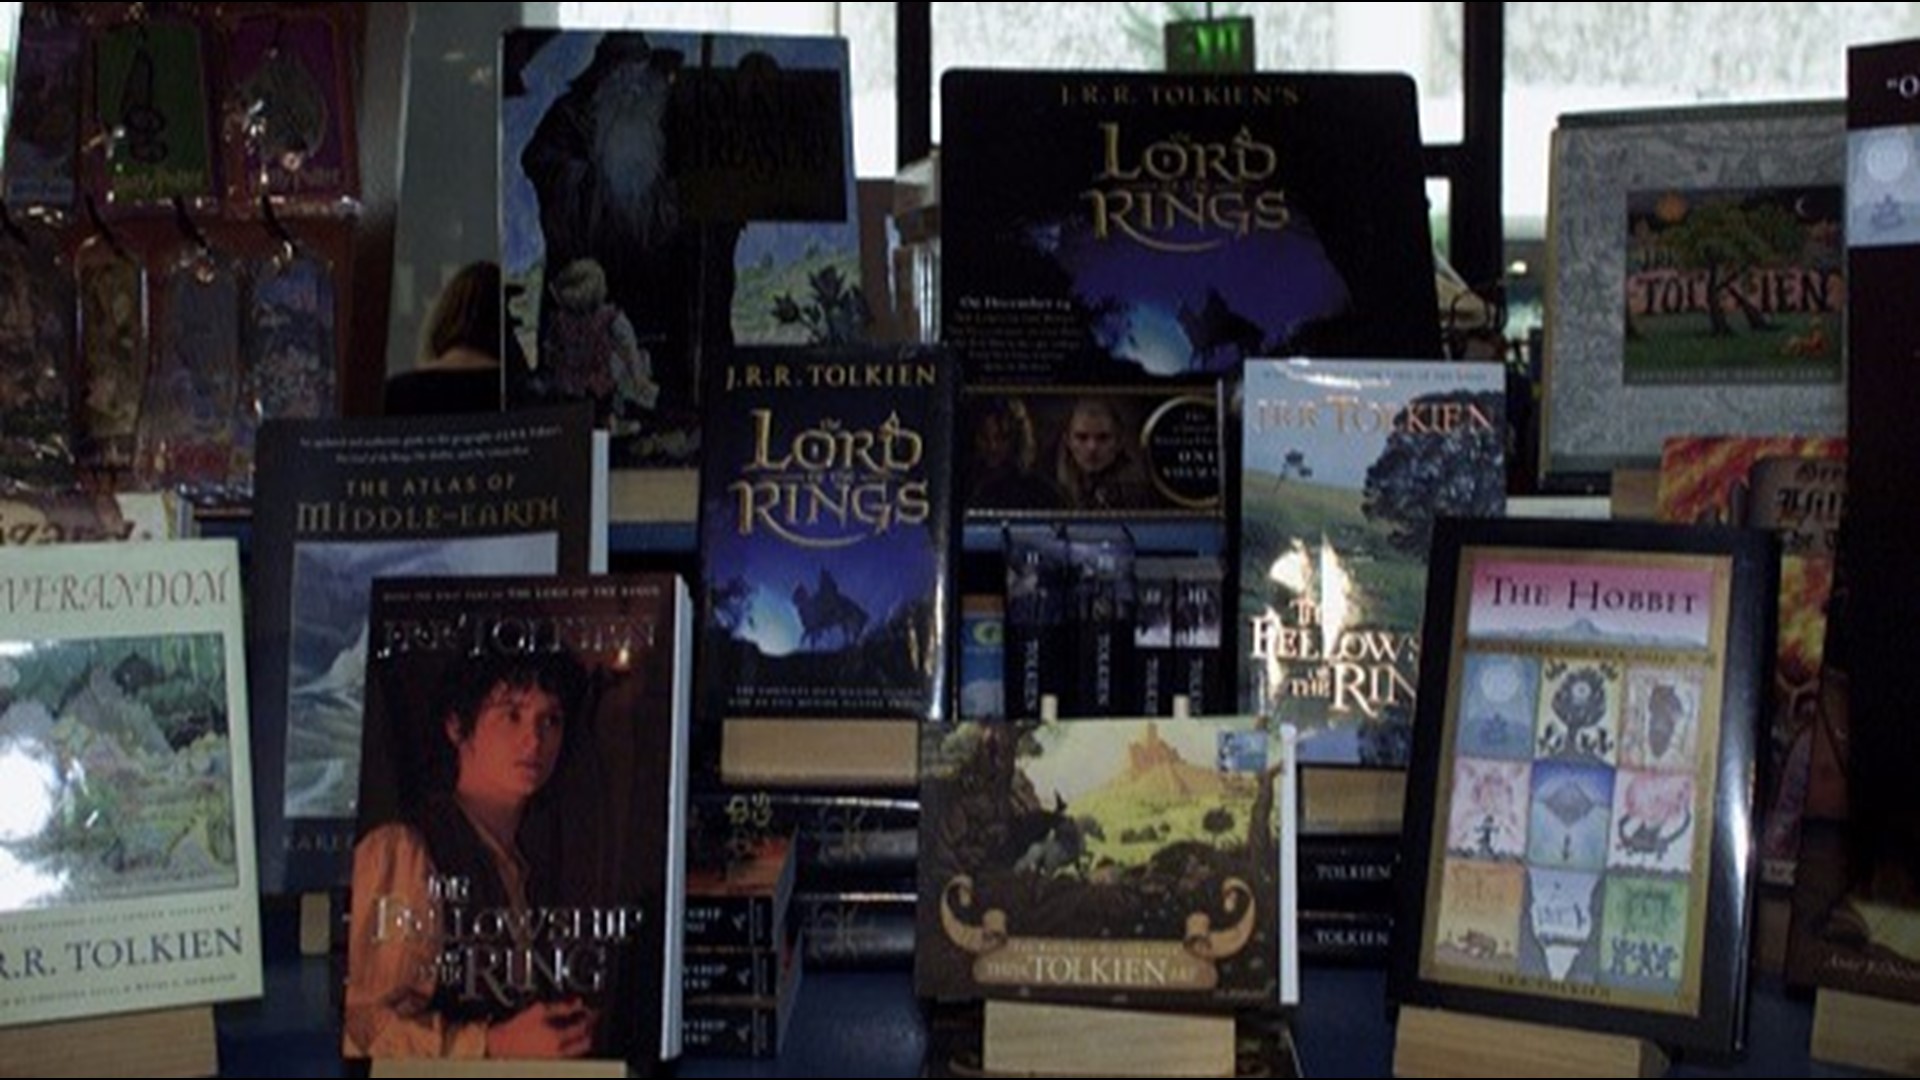 J. R. R. Tolkien is known for his work on "The Lord of the Rings" and "The Hobbit", books that have sparked a love of fantasy and reading in countless people over the years. March 25, 2019 is National Tolkien Reading Day.